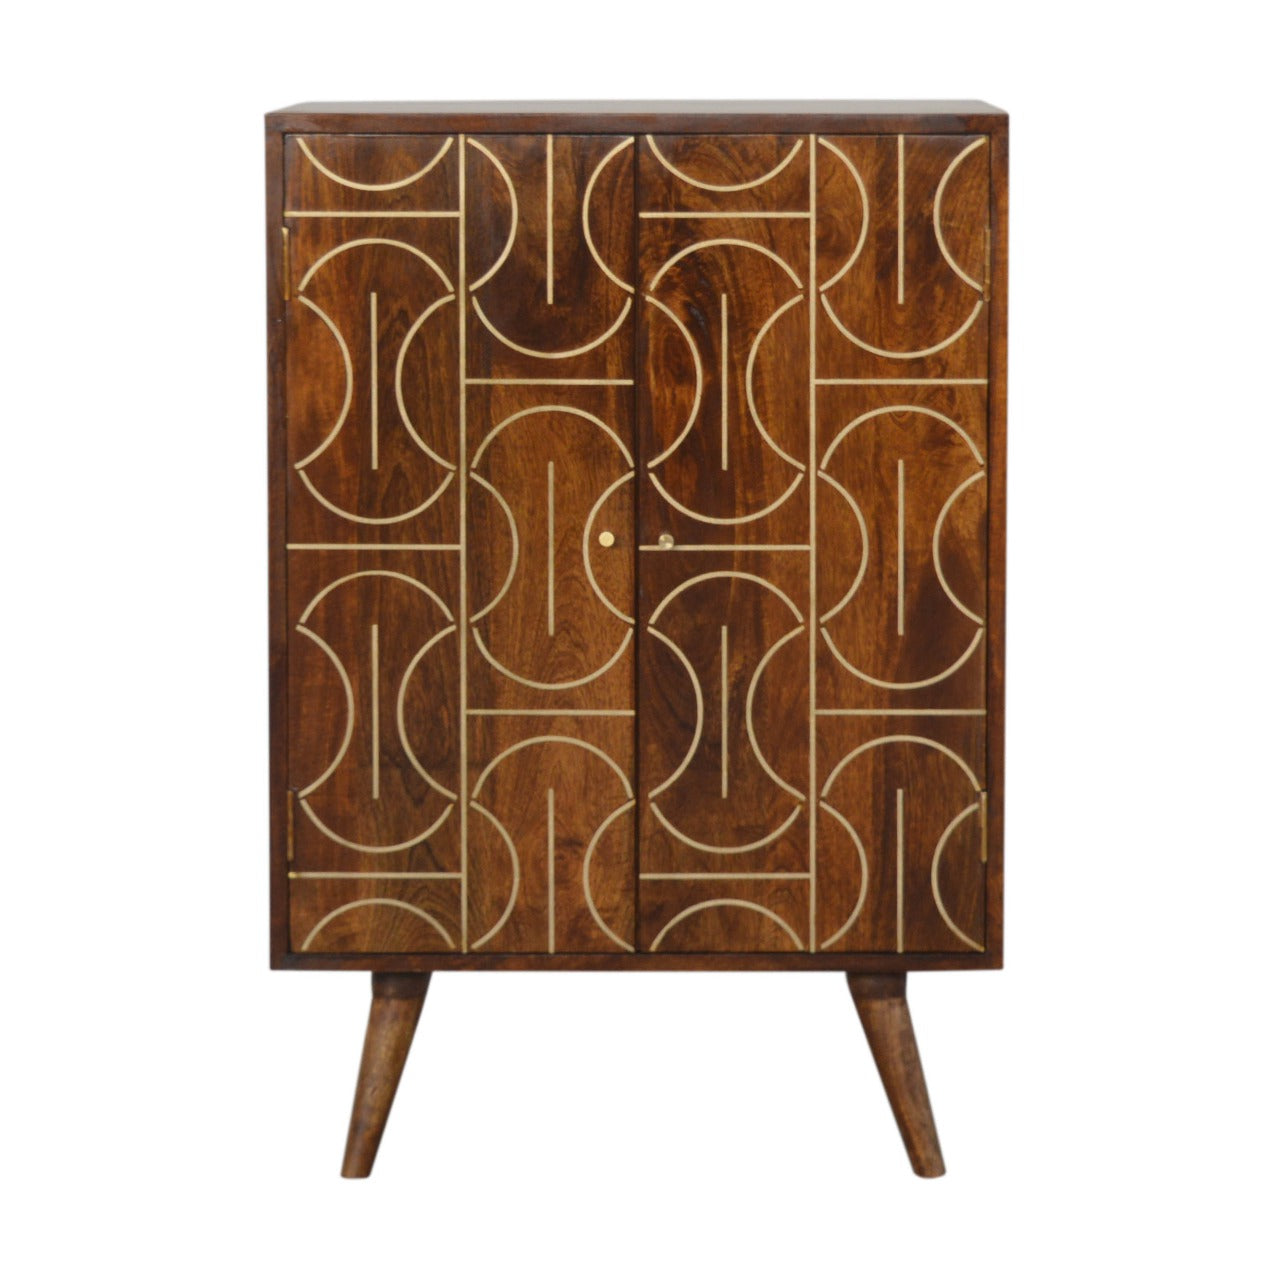 View Chestnut Gold Inlay Abstract Cabinet information